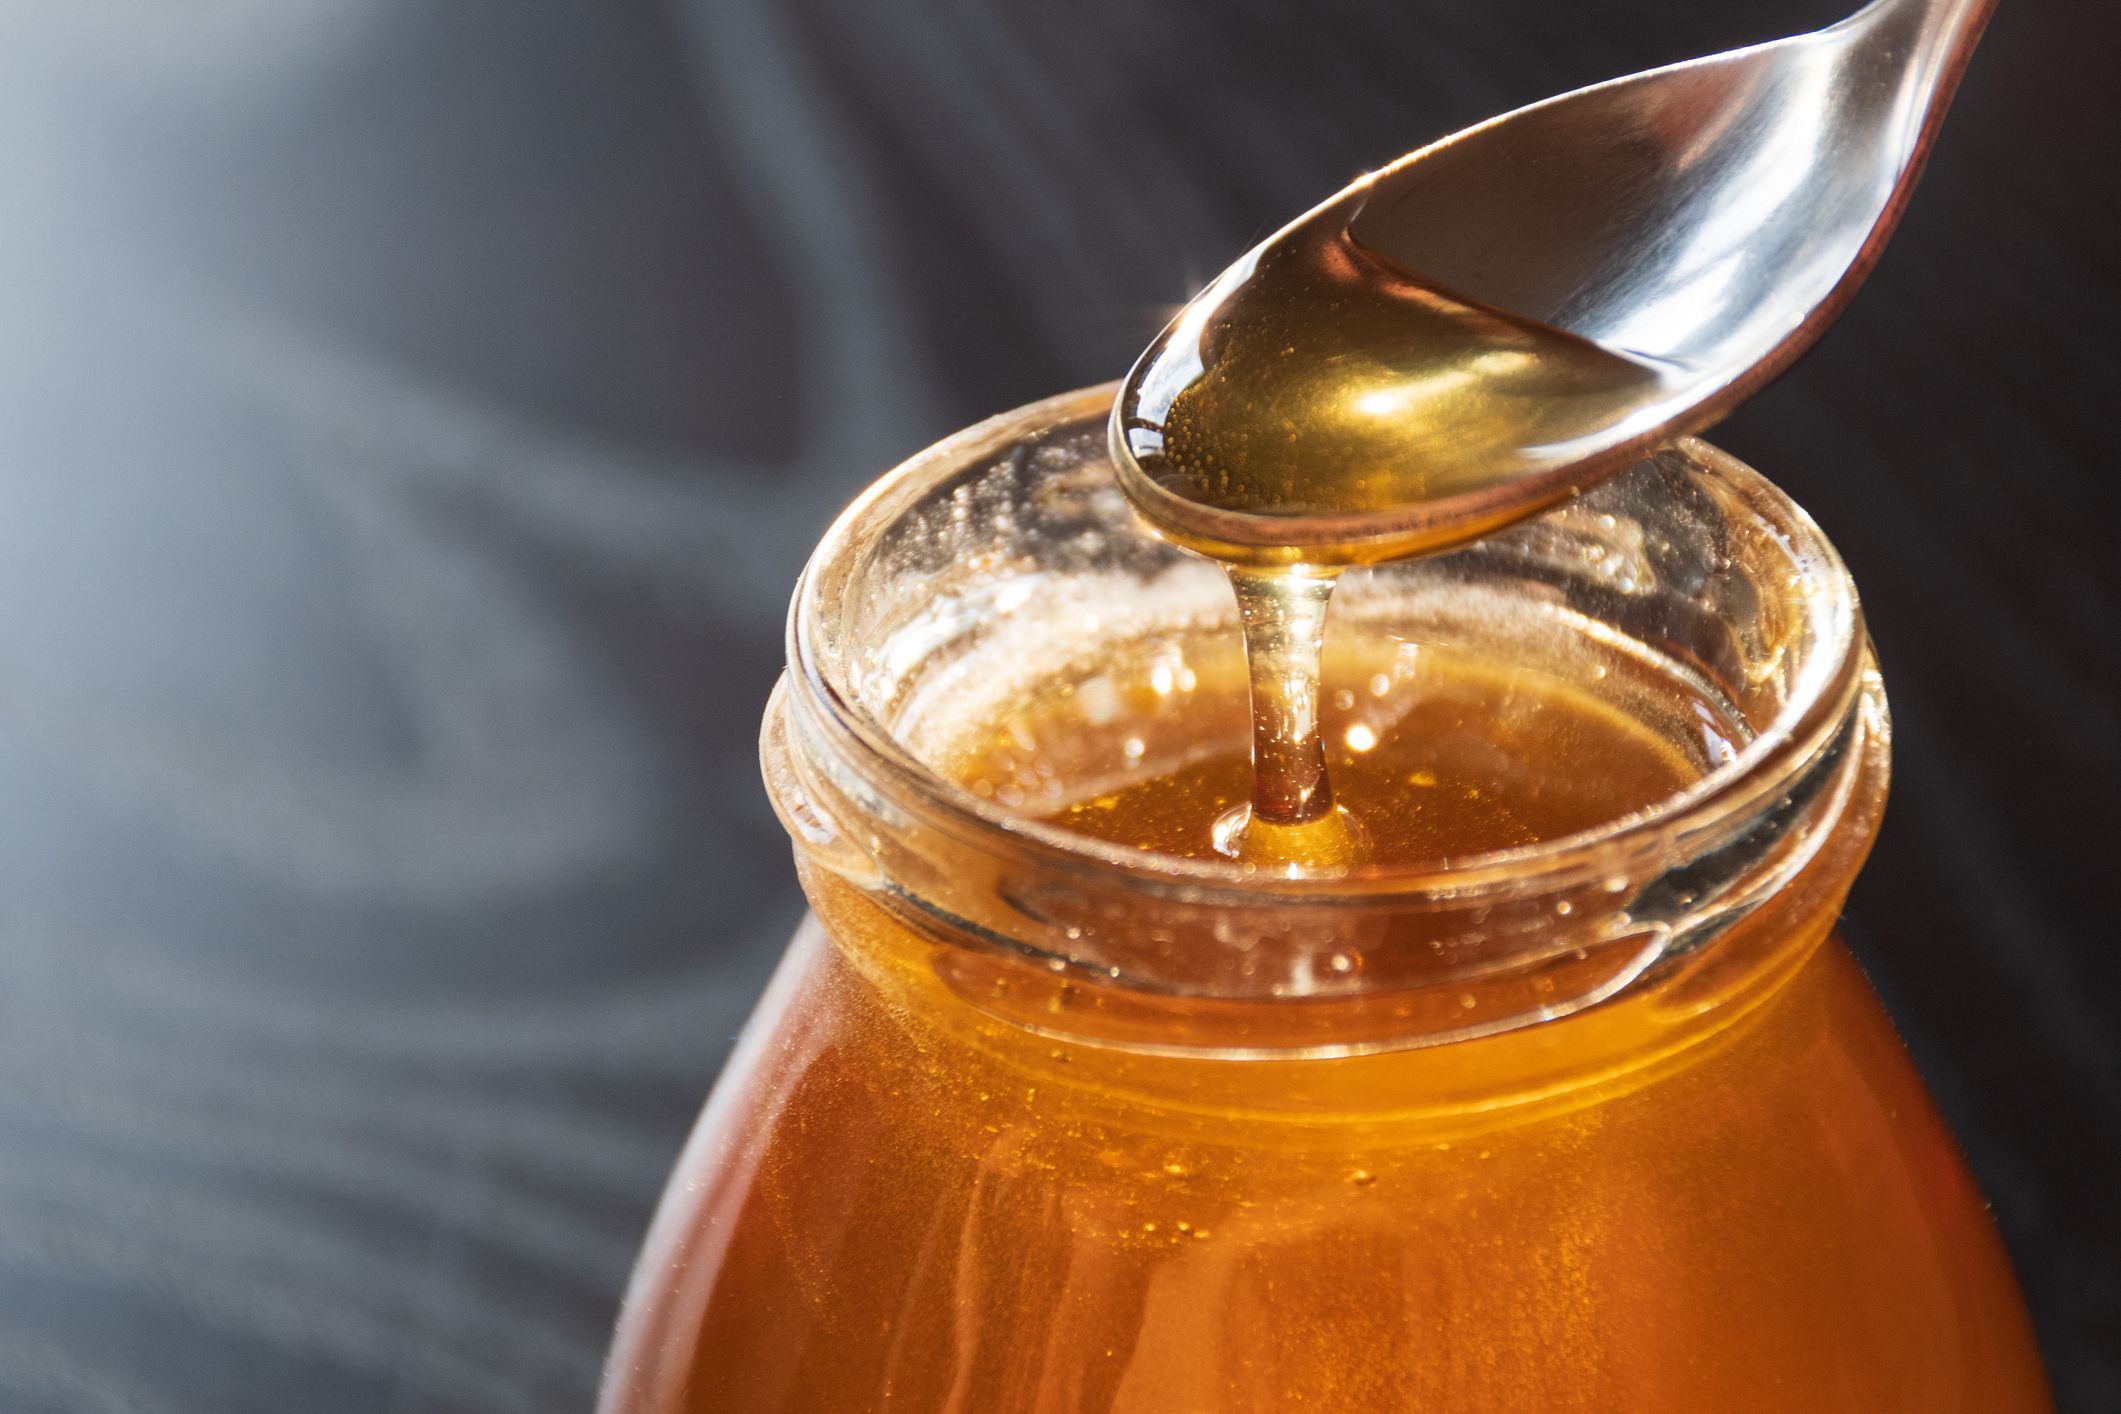 What is golden syrup? No, it's not corn syrup